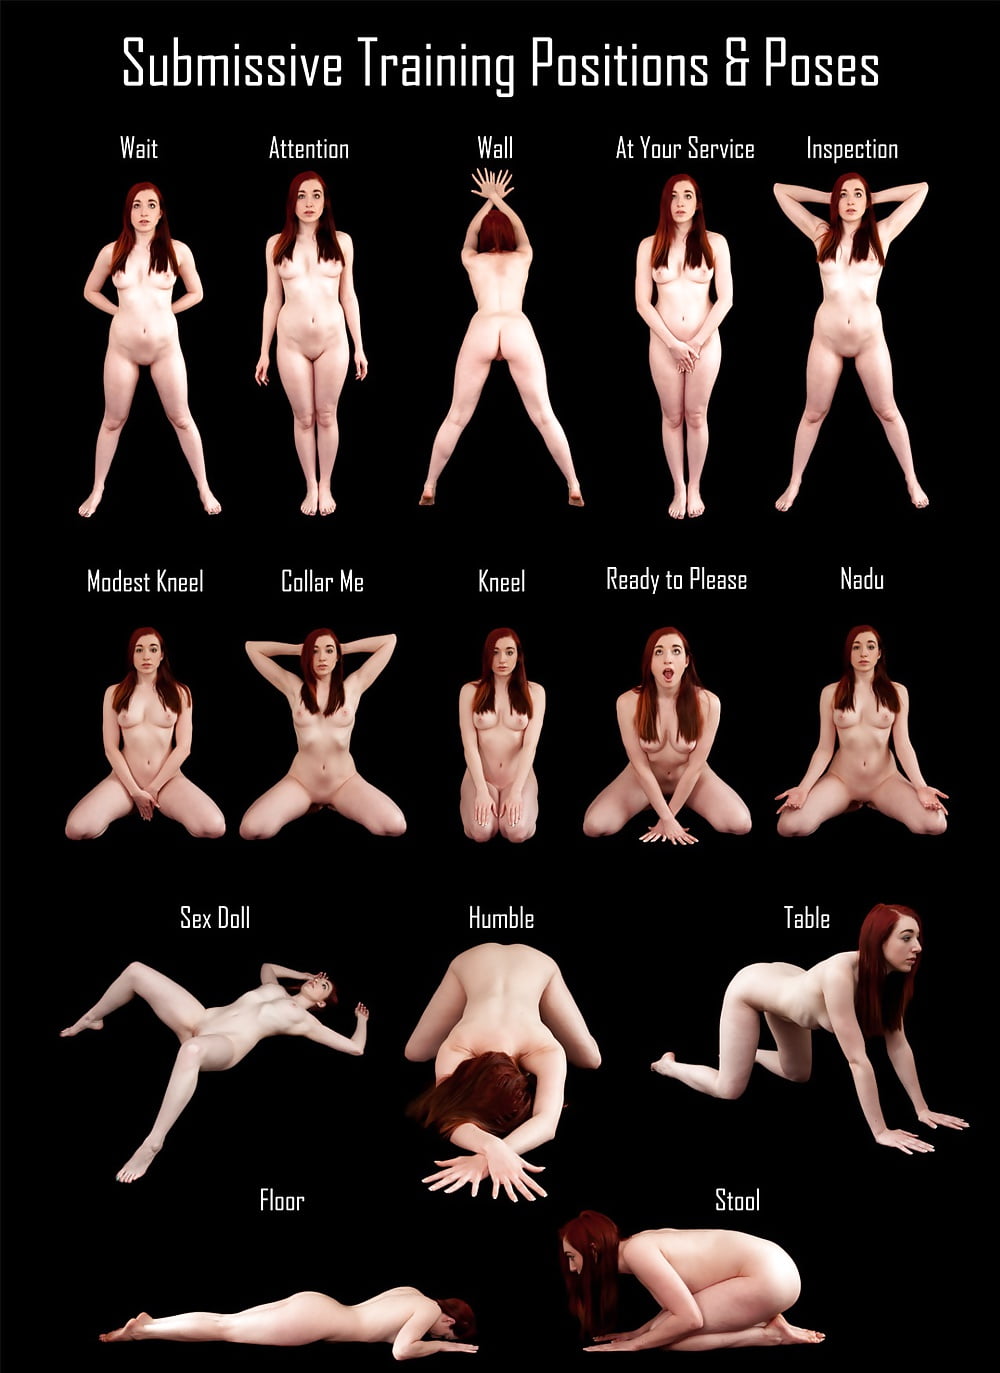 Submissive training positions